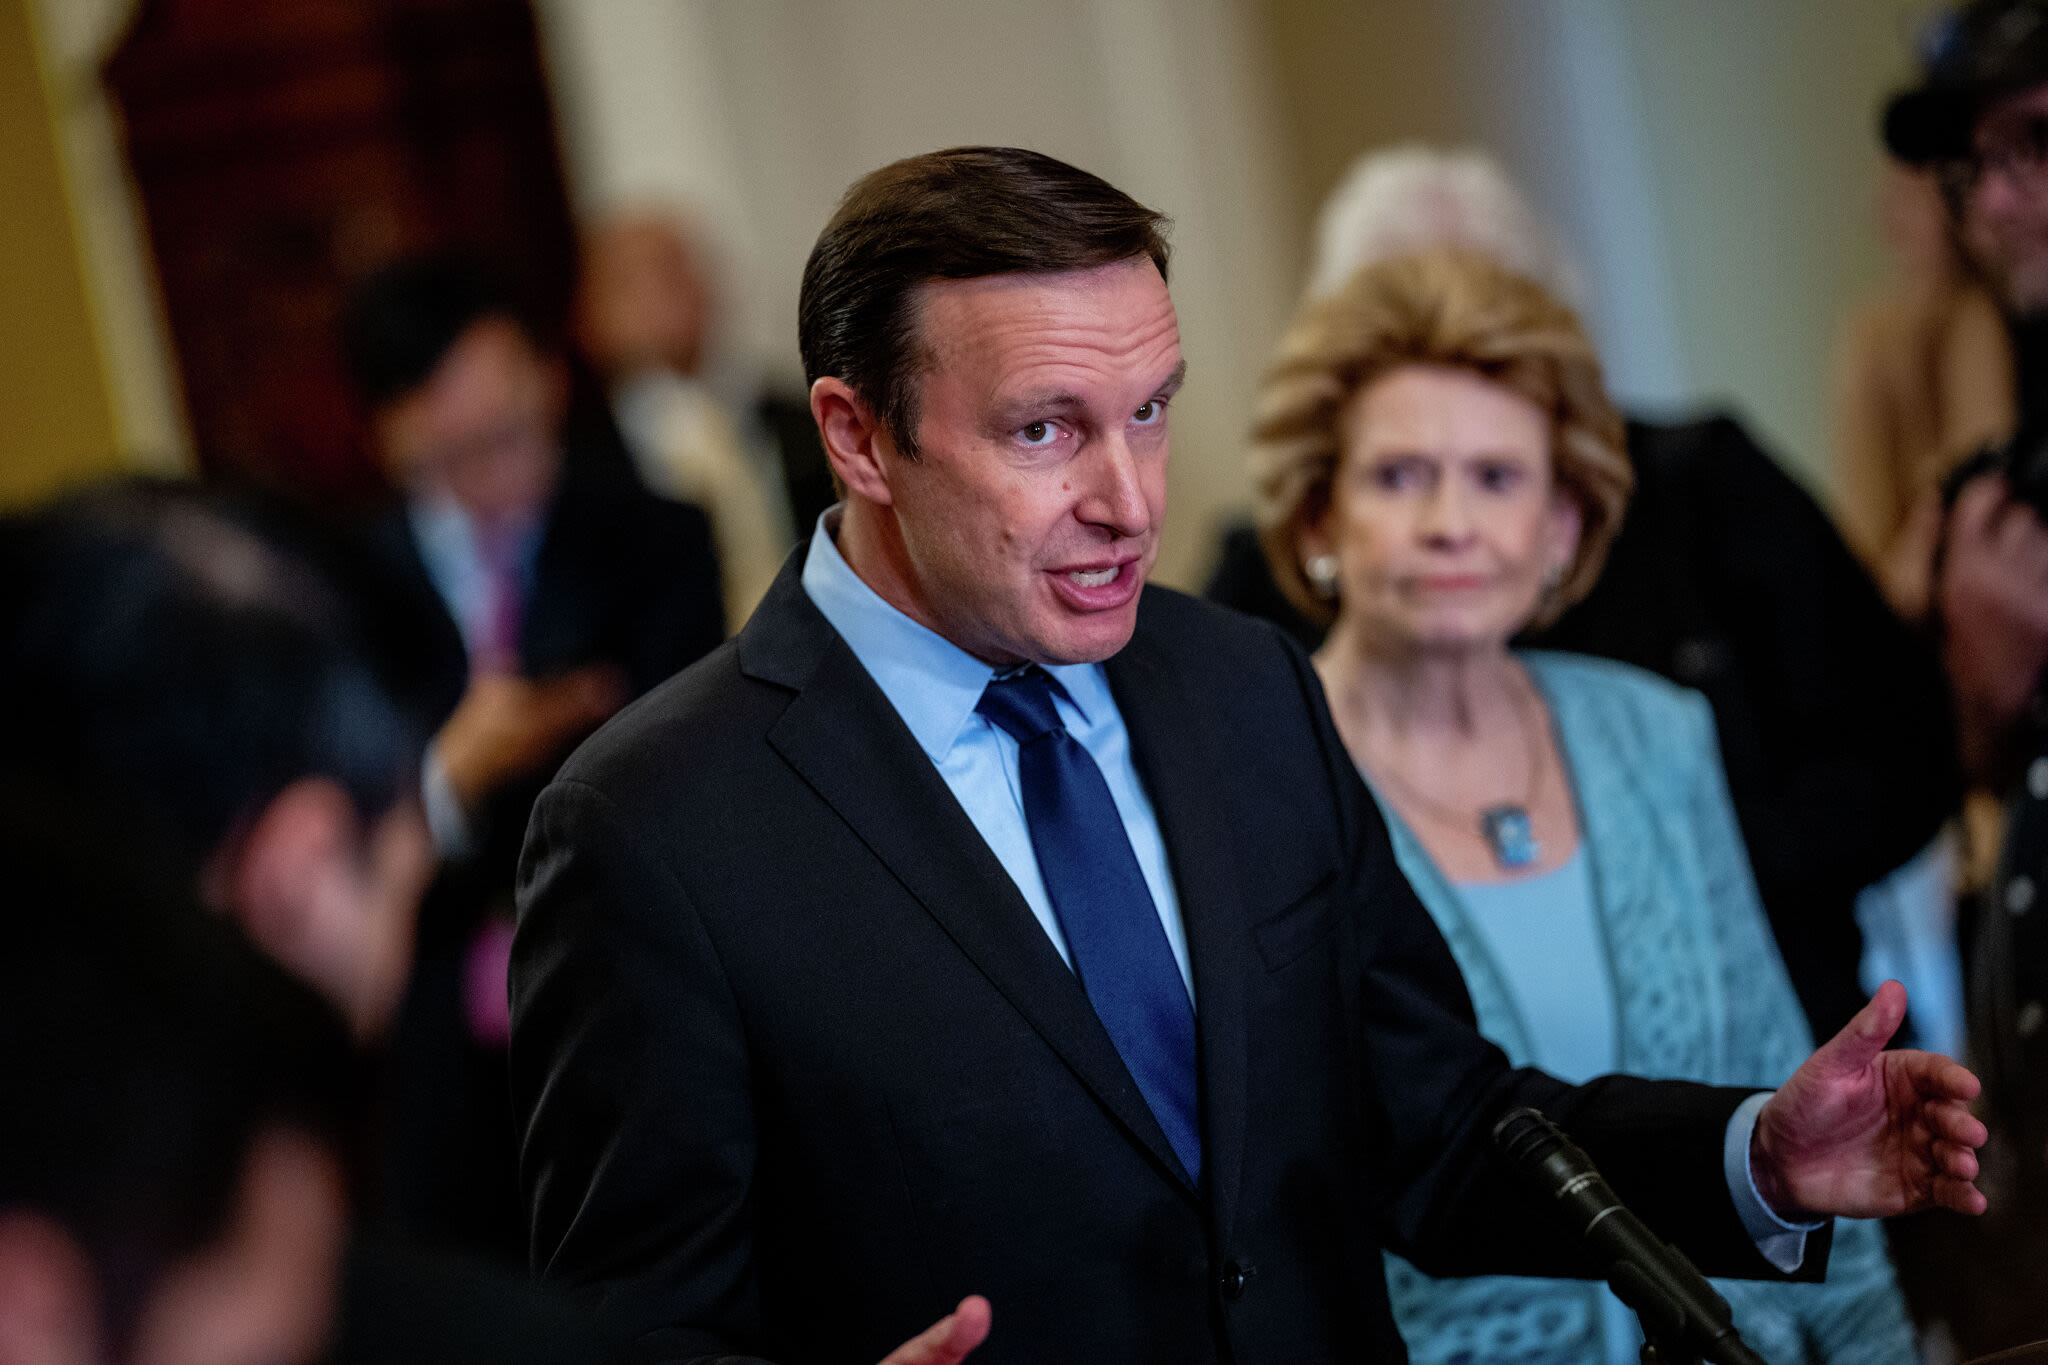 Opinion: Dear Sen. Murphy, CT immigrant families need your help